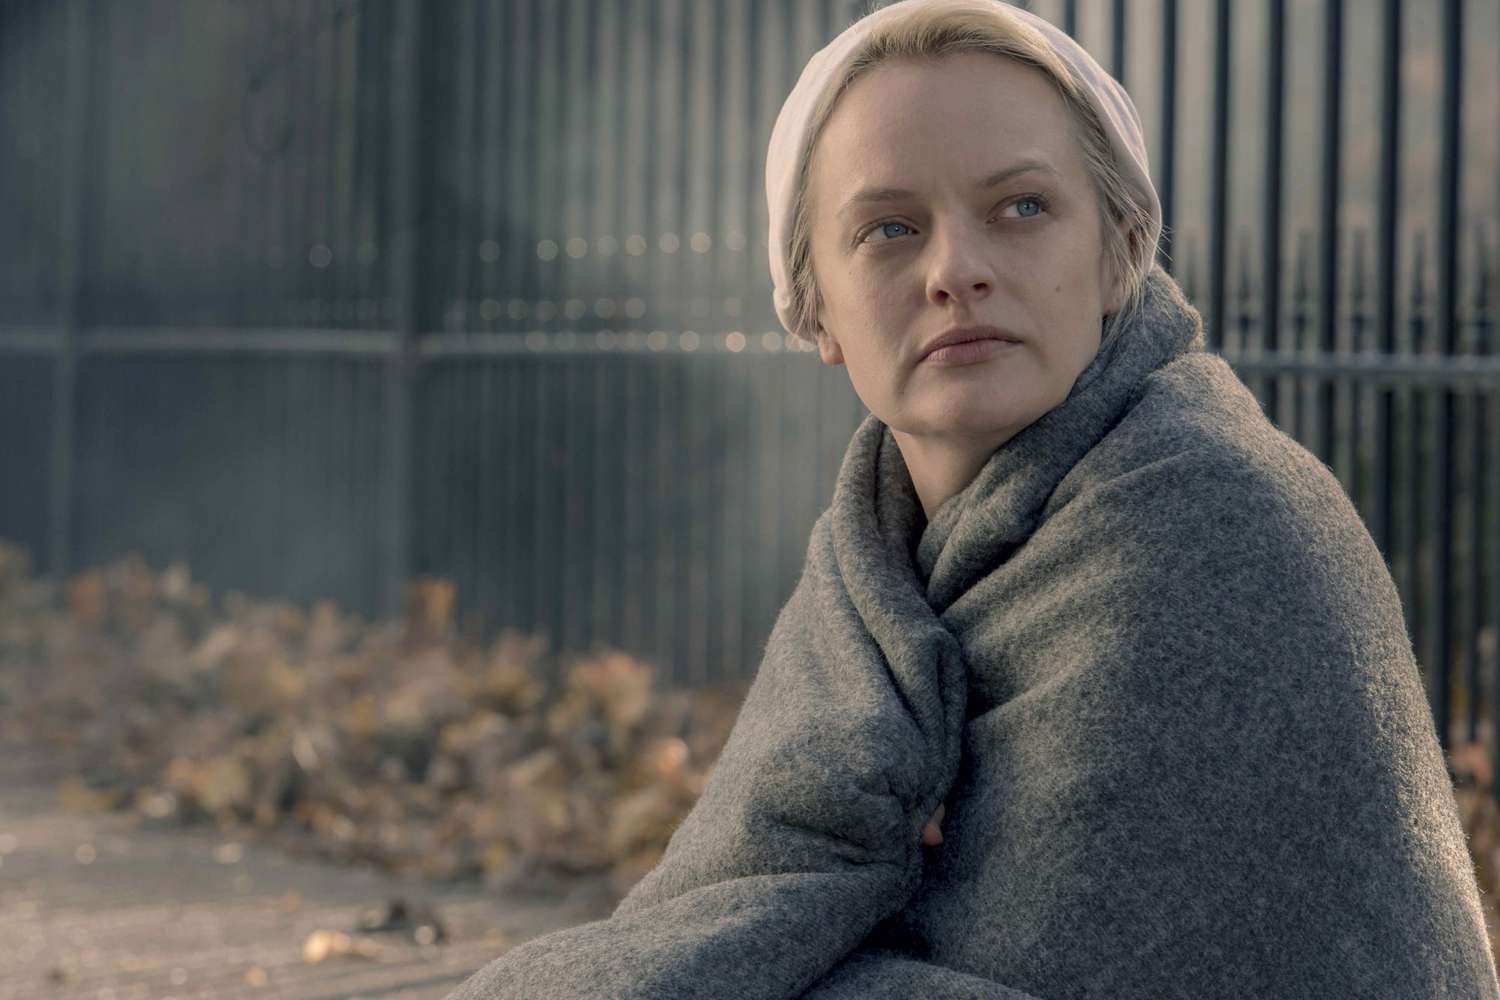 The Handmaid's Tale -- "Night" - Episode 301 -- June embarks on a bold mission with unexpected consequences. Emily and Nichole make a harrowing journey. The Waterfords reckon with Serena Joy&rsquo;s choice to send Nichole away. June (Elisabeth Moss), shown. (Photo by: Elly Dassas/Hulu)